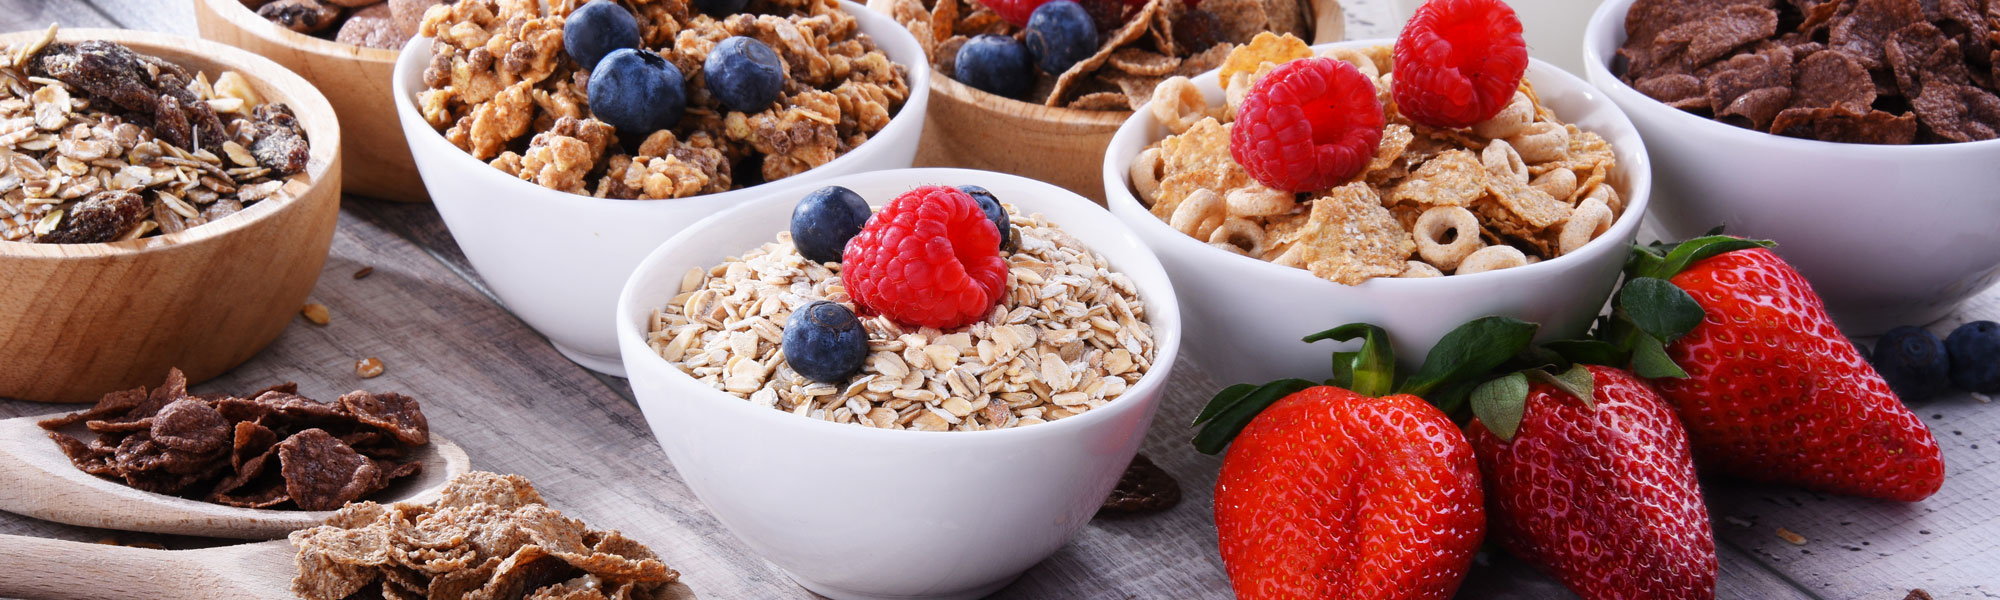 Cereal Fruit and more healthy snacks